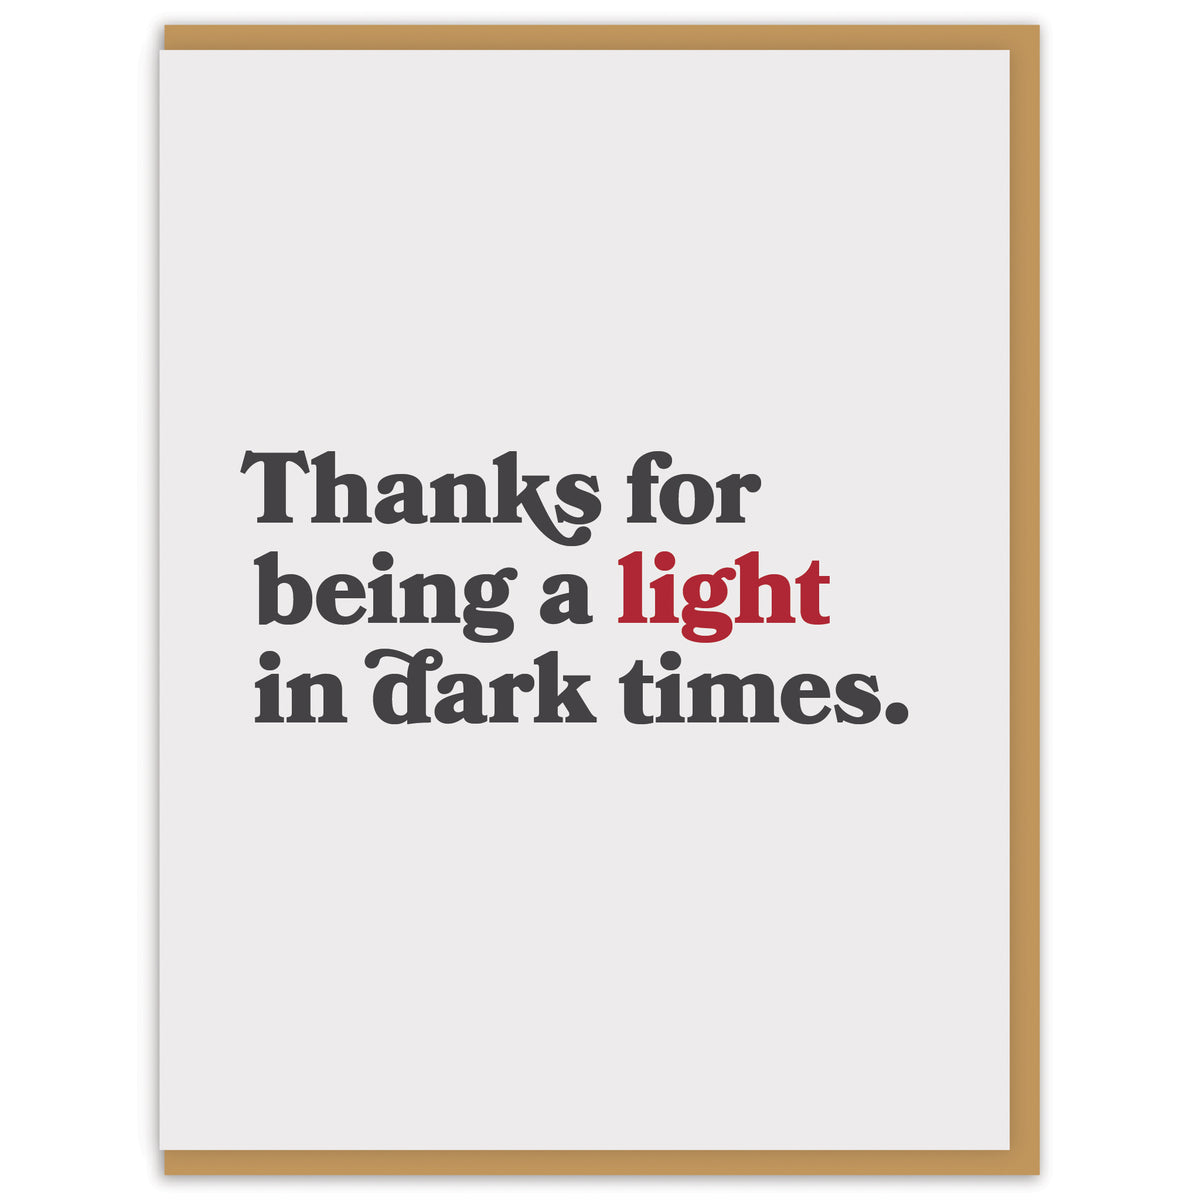 Thanks for being a light in dark times.